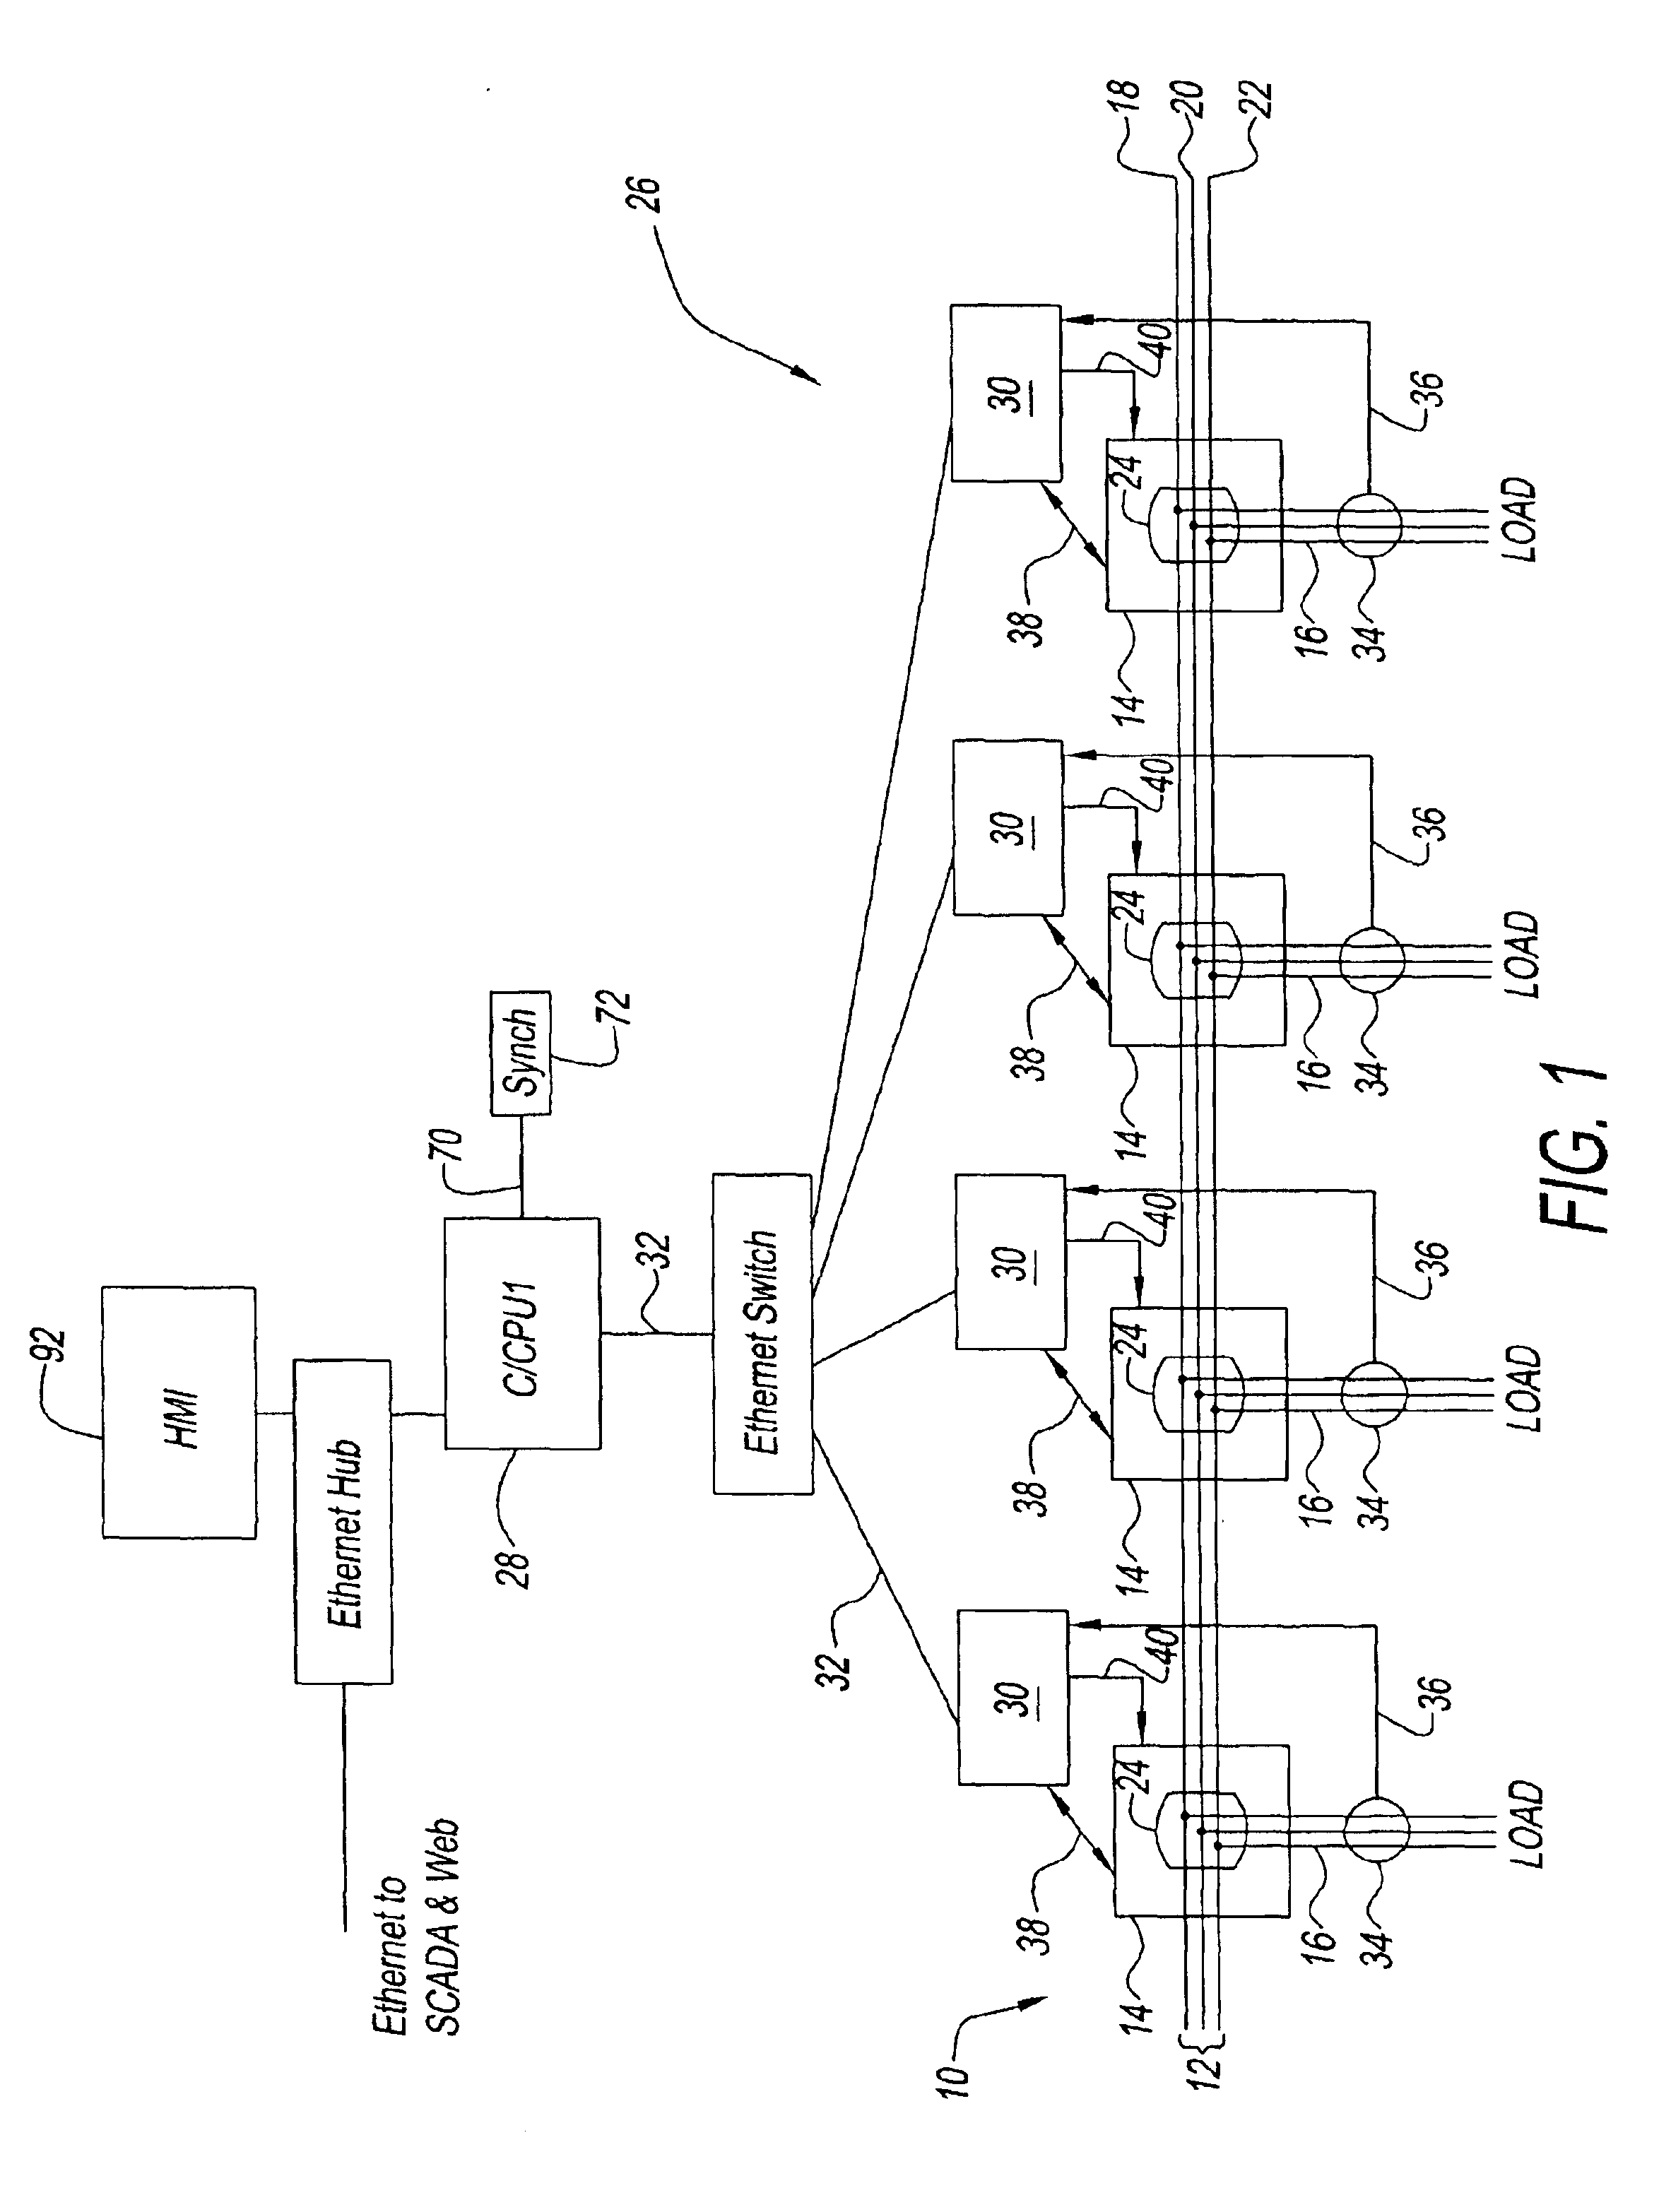 Locator devices and methods for centrally controlled power distribution systems